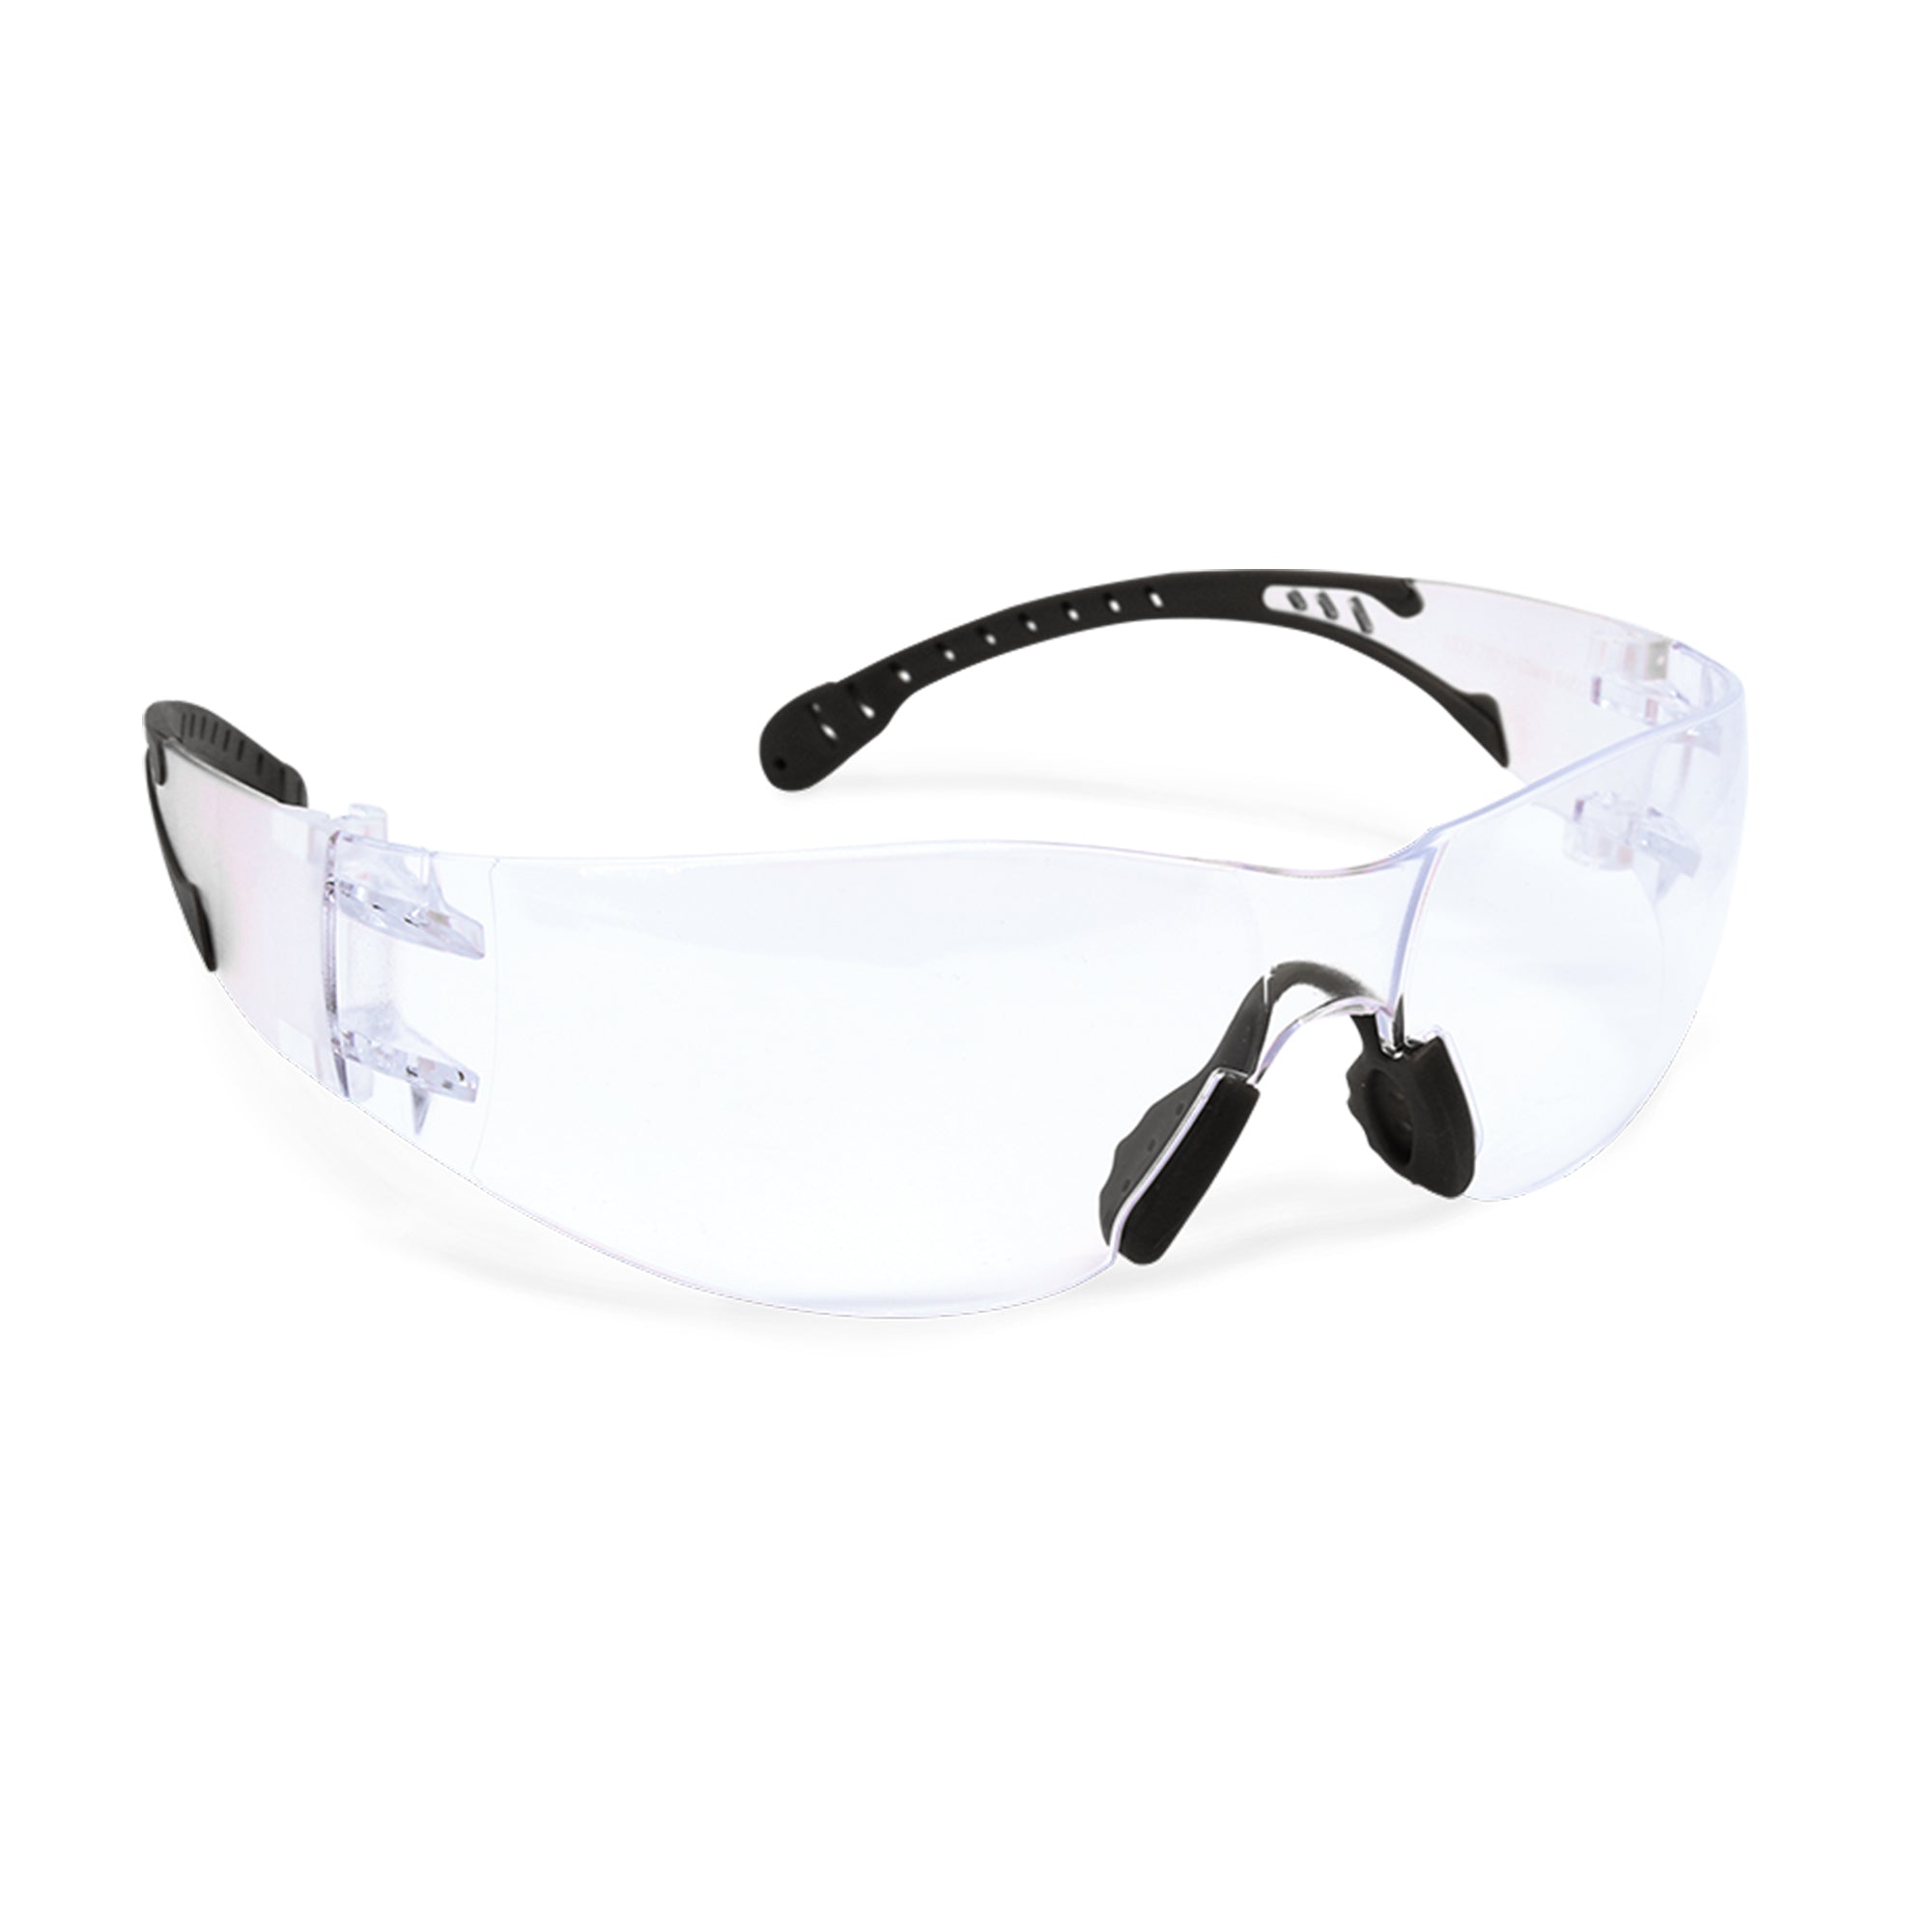 WORKHORSE® Superflex Safety Glasses with non-slip grip nose piece and arms, Clear